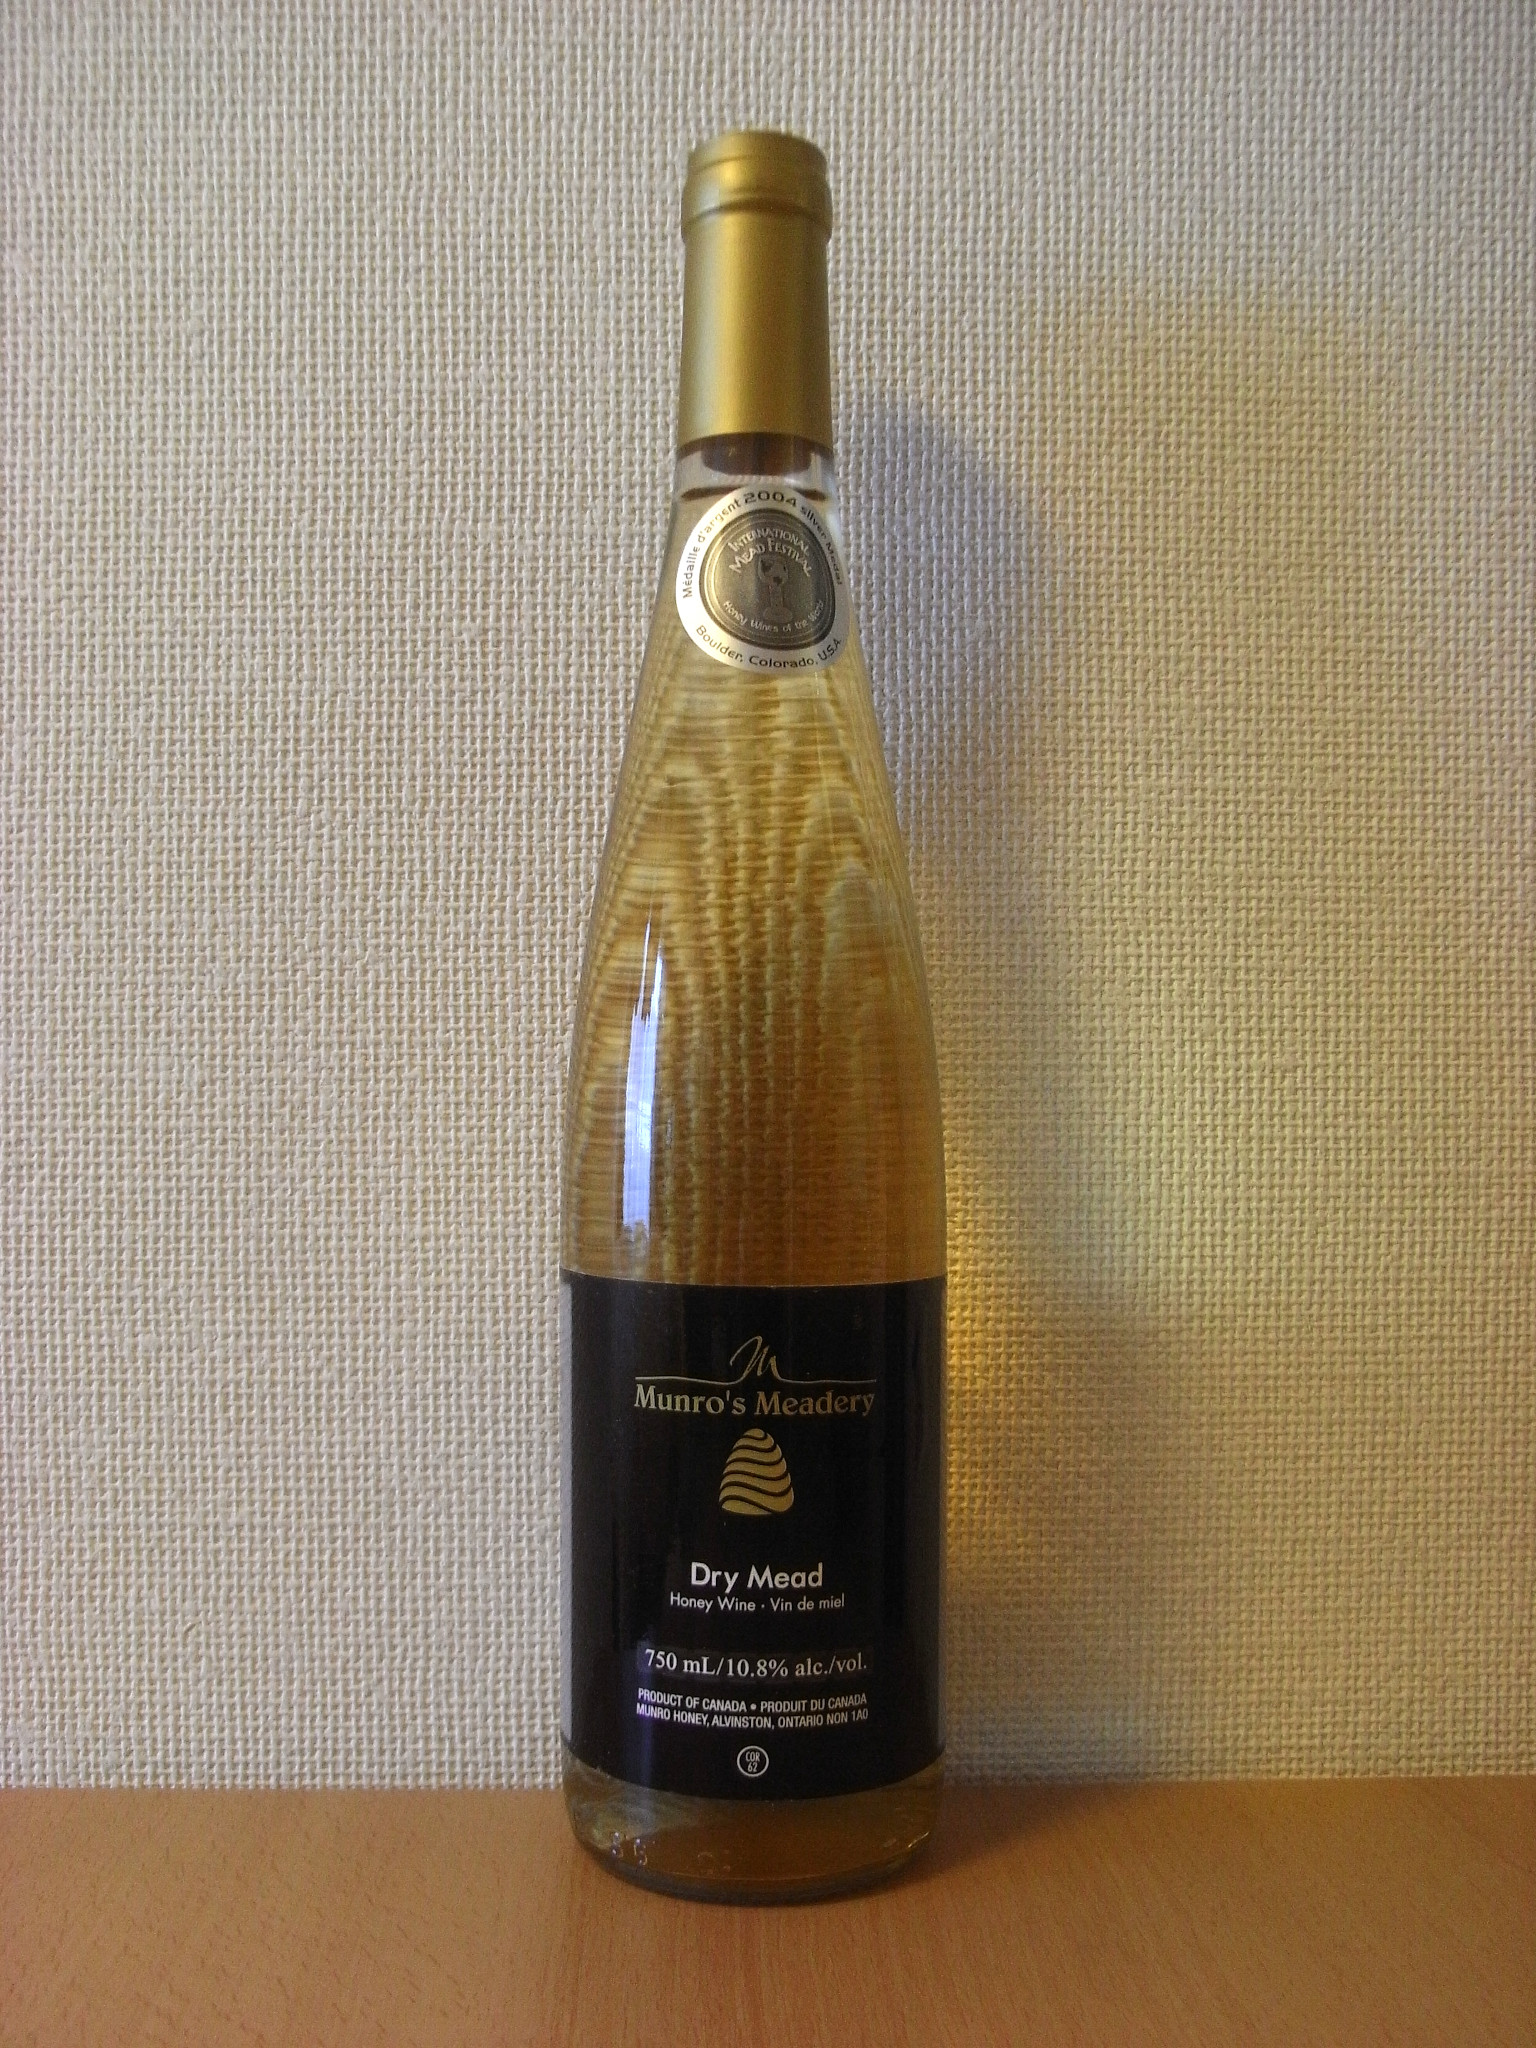 Munro’s meadery Dry Mead